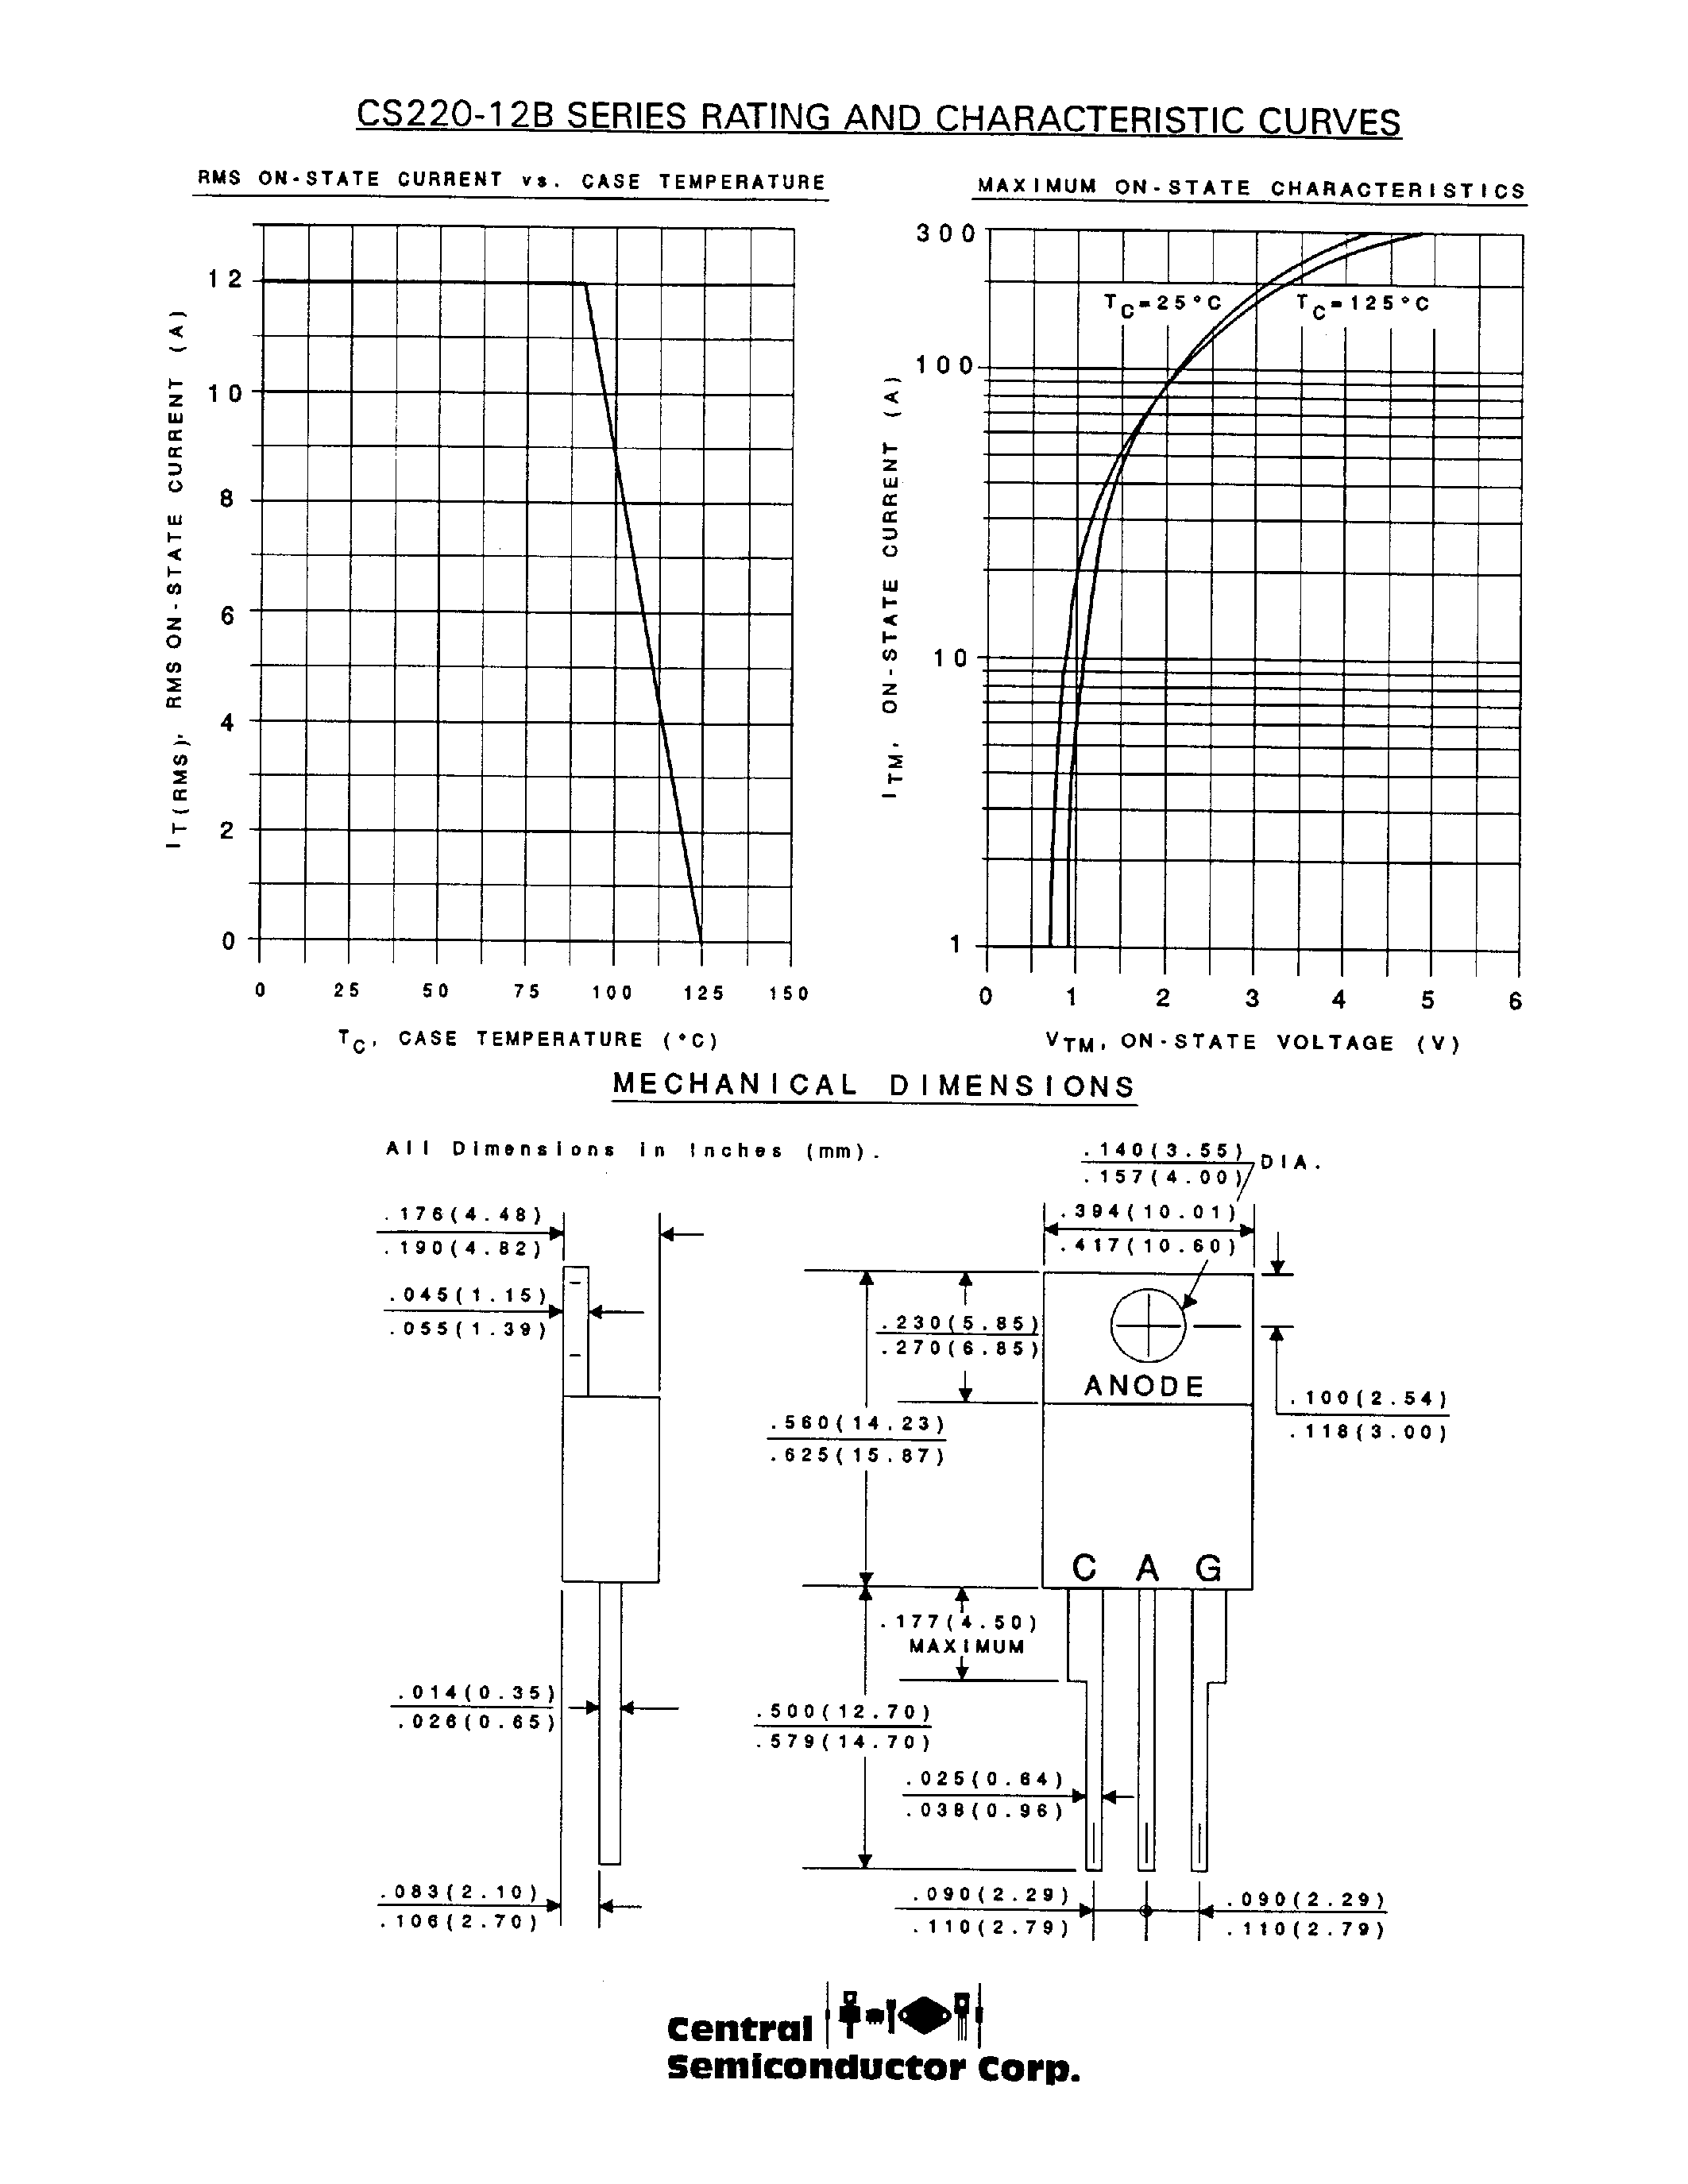 Datasheet CS220-12P - SILICON CONTROLLED RECTIFIER 12 AMP/ 200 THRU 1000 VOLTS page 2